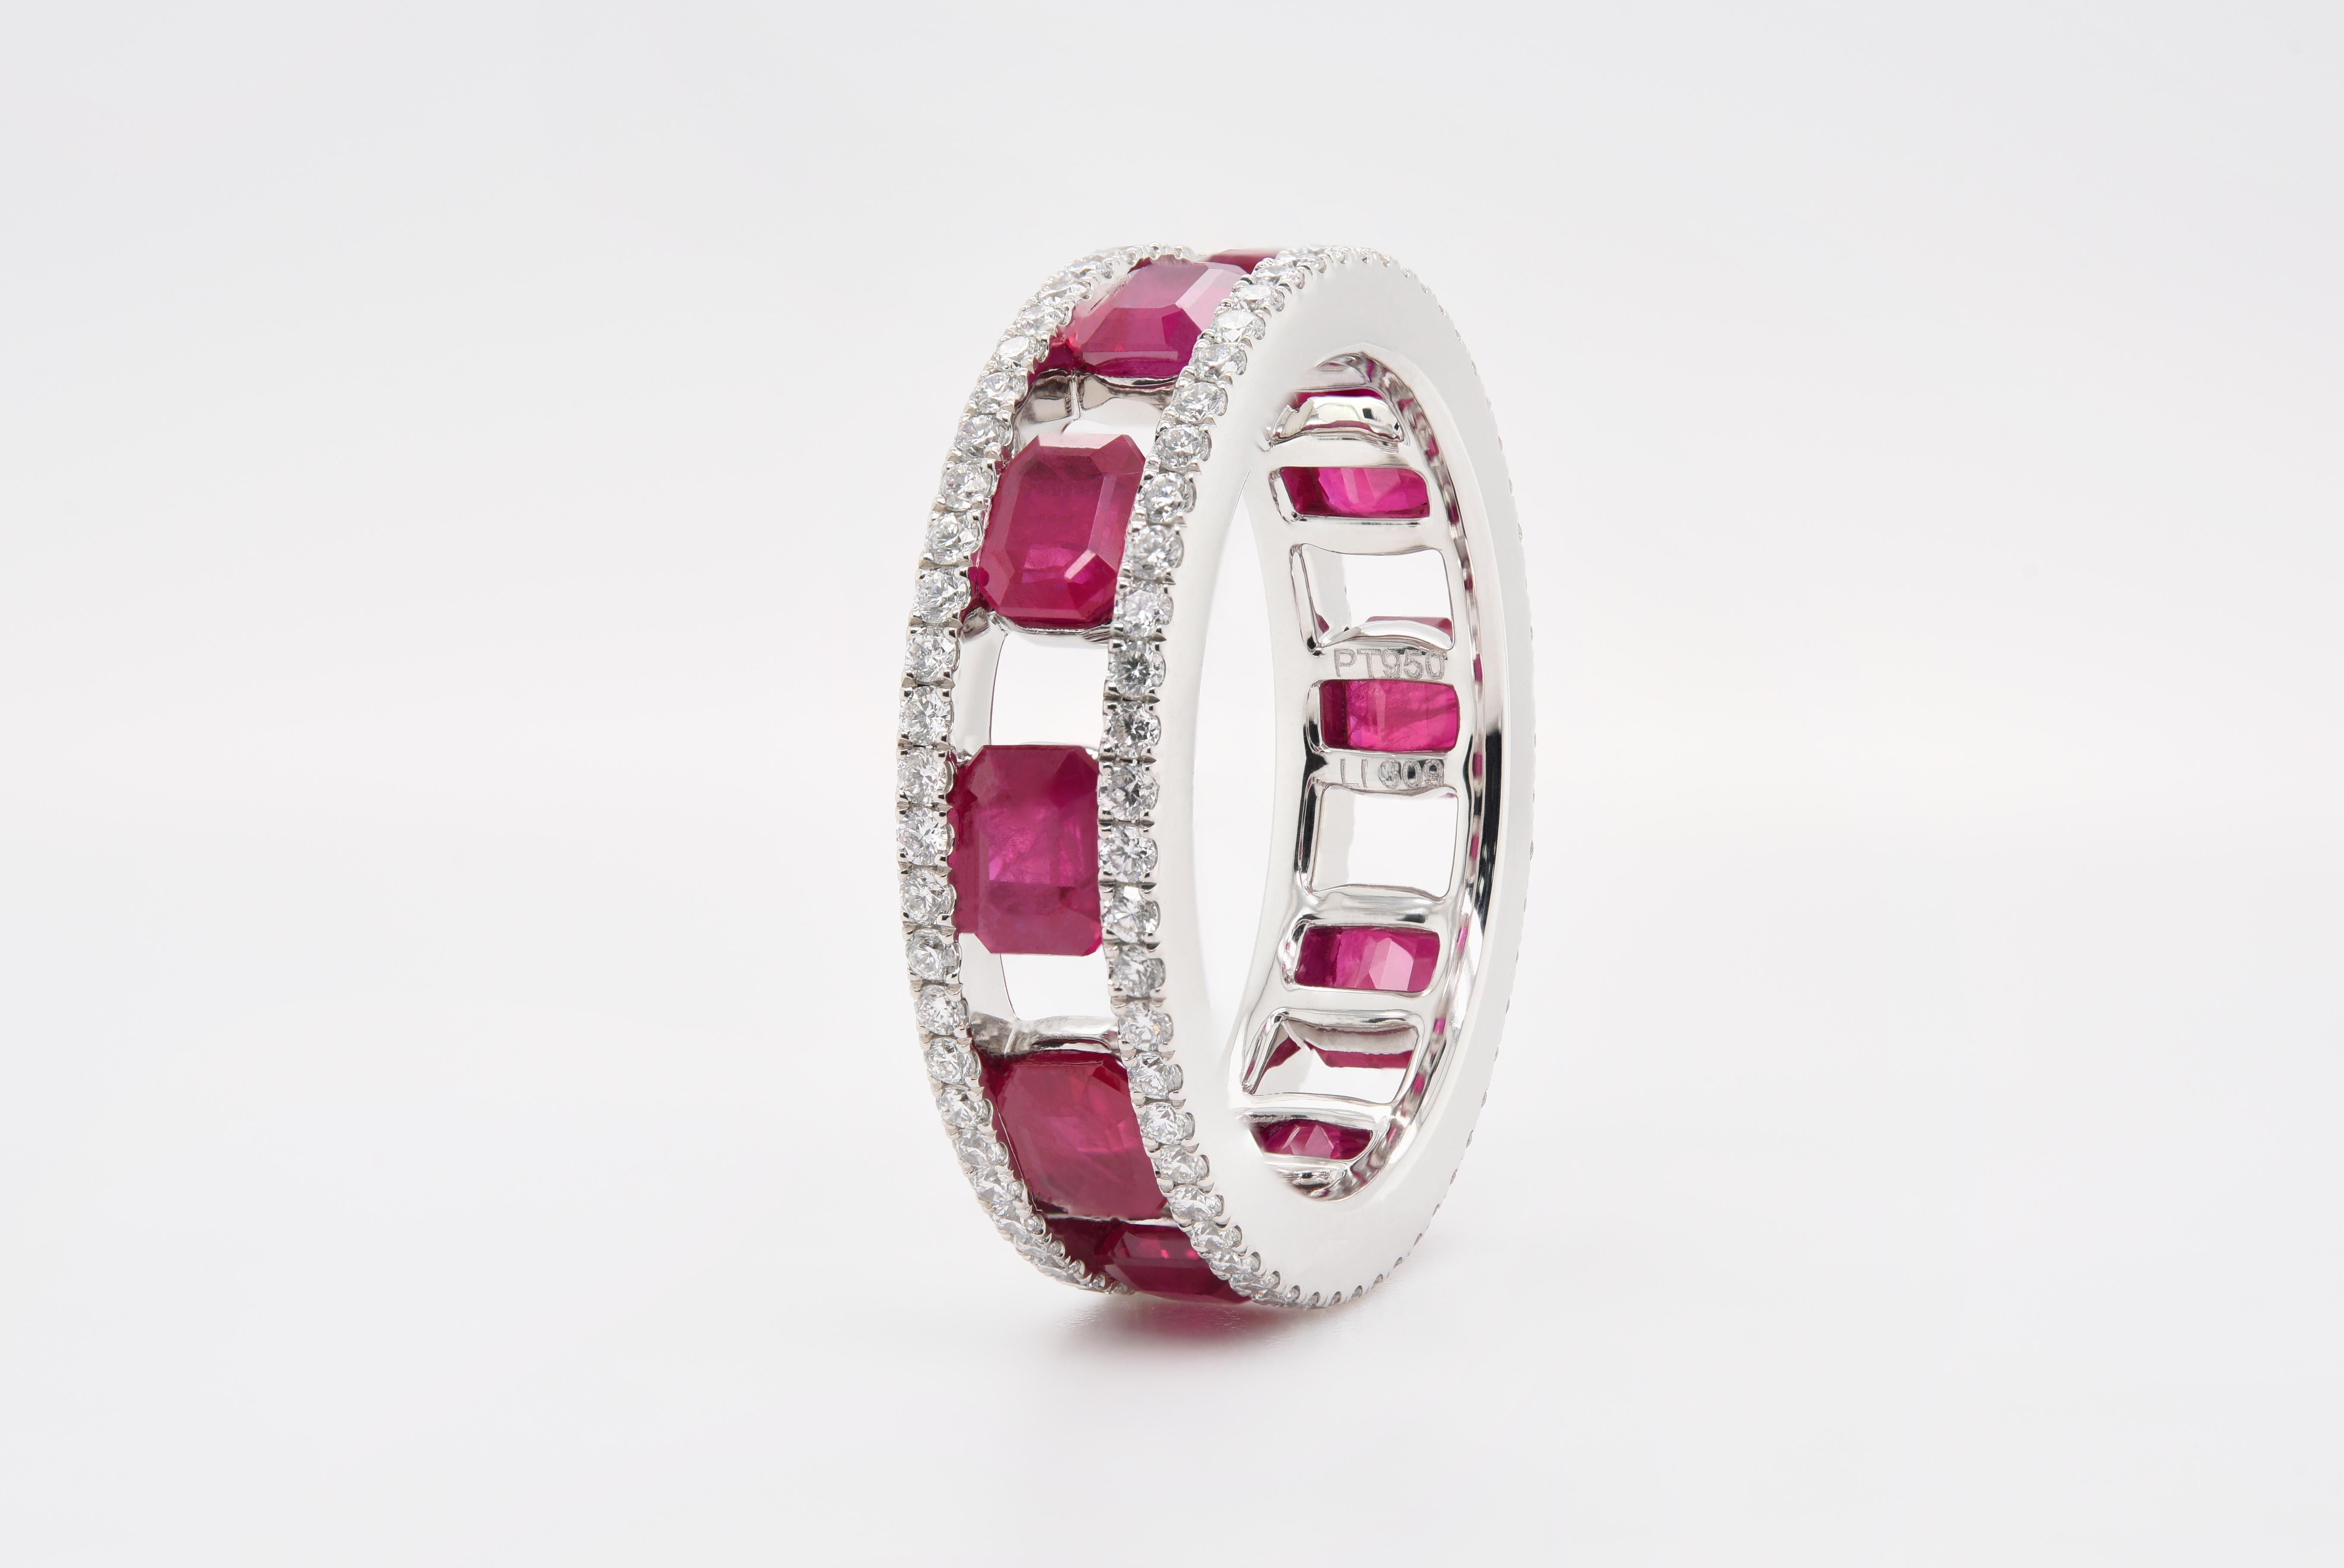 This ruby and diamond band is named after the famous arena in Gaul, France for its design and has a 114 Diamonds with 10 carats in Rubies for a total gem weight of over 3.75 carats all created in Platinum.

At JAG New York we have been designing,